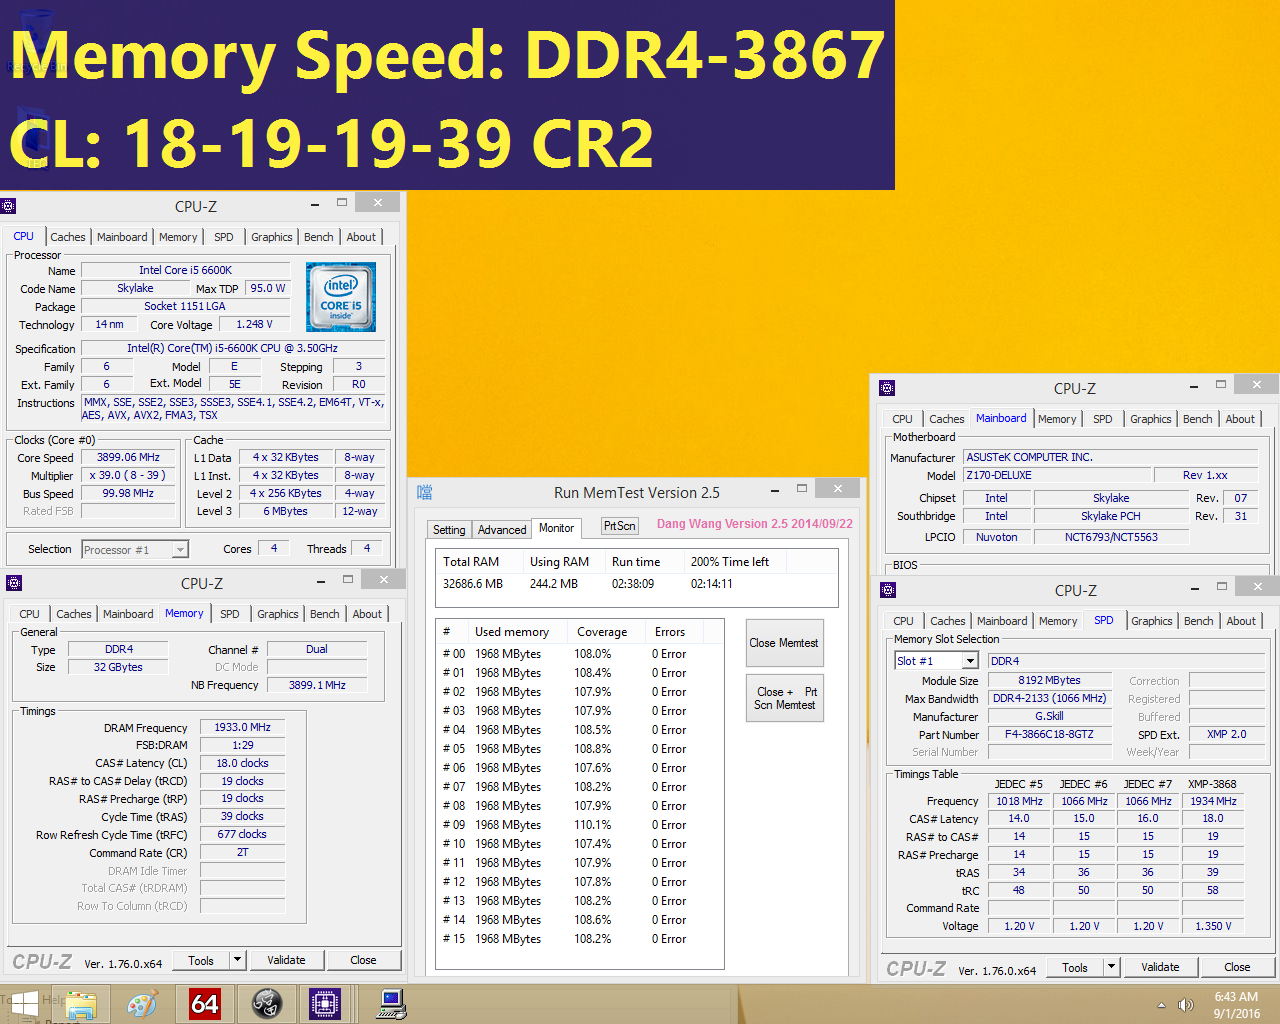 Media asset in full size related to 3dfxzone.it news item entitled as follows: G.SKILL annuncia il kit di memoria Trident Z DDR4 3866MHz CL18 32GB | Image Name: news24884_ddr4-3866mhz-32gb-trident-z-memory-kit_2.png